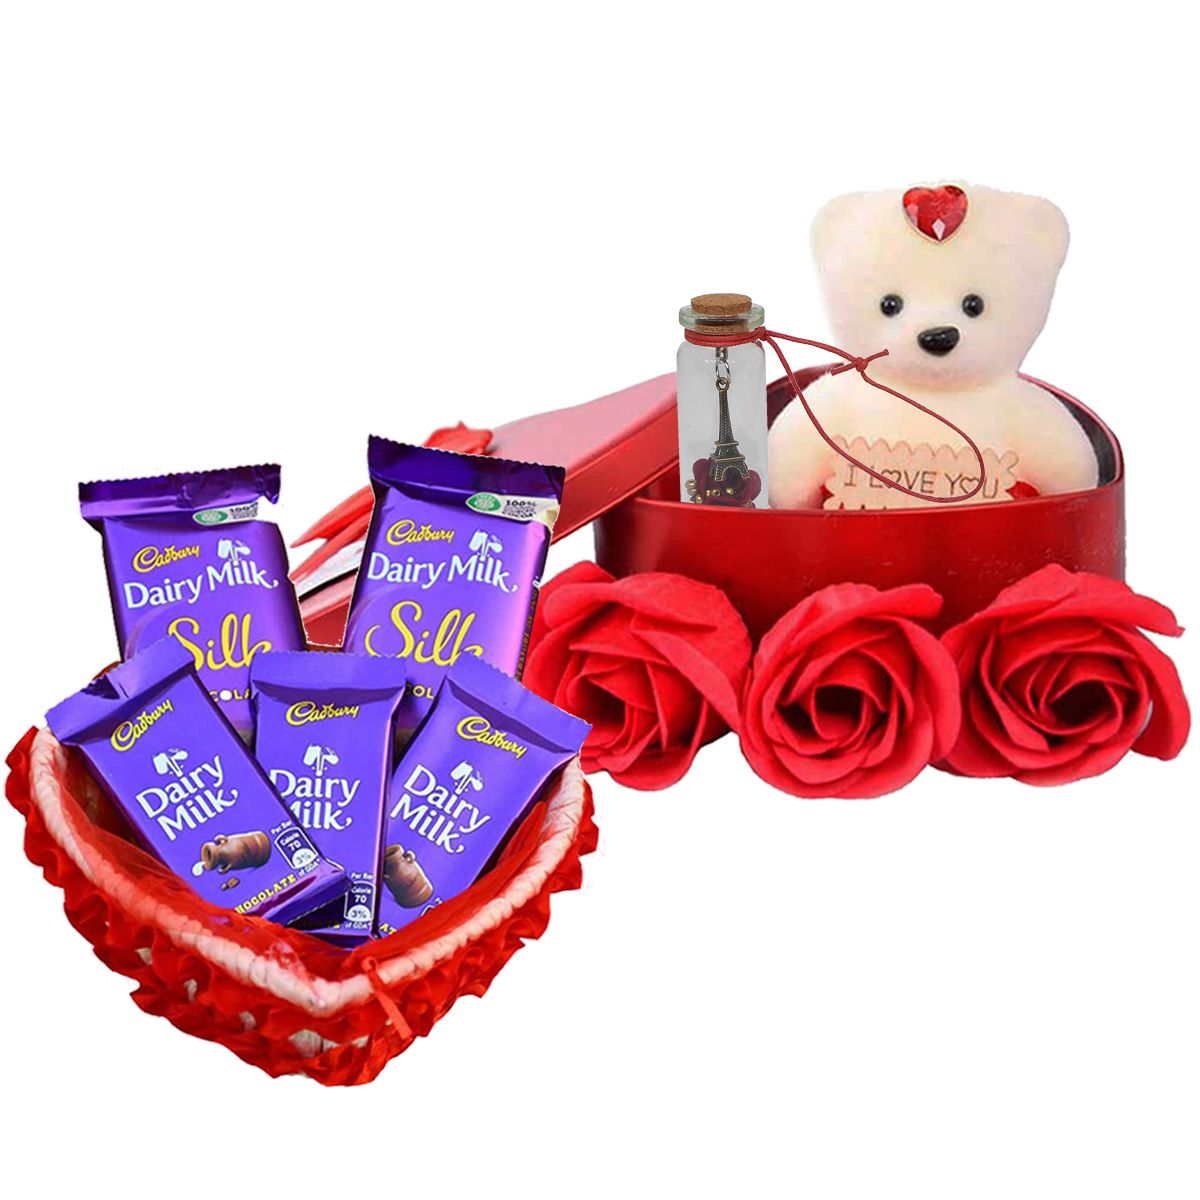 Buy AR Giftzadda Love Secret Message Bottles Set Gifts |Valentine Day Gift|Romantic  Gift|Personalised Gift|Gift for Boyfriend|Gift for Girlfriend Online at Low  Prices in India - Amazon.in